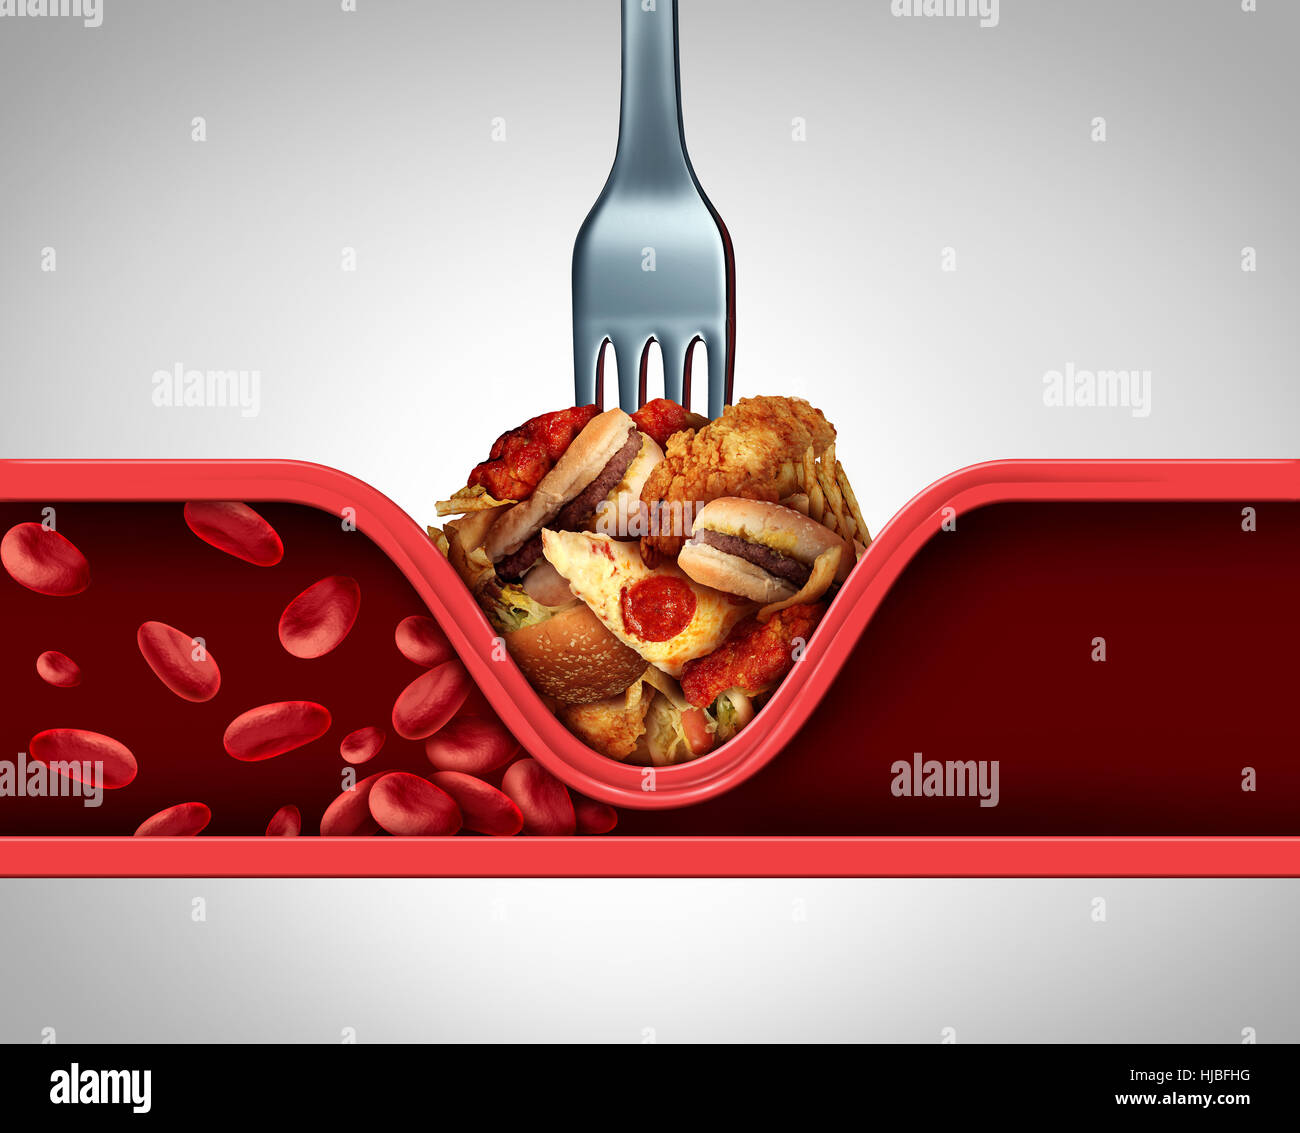 Poor circulation food and cause of clogged artery or human vein as a fork with greasy fast food causing narrowing of arteries blocking blood flow to t Stock Photo